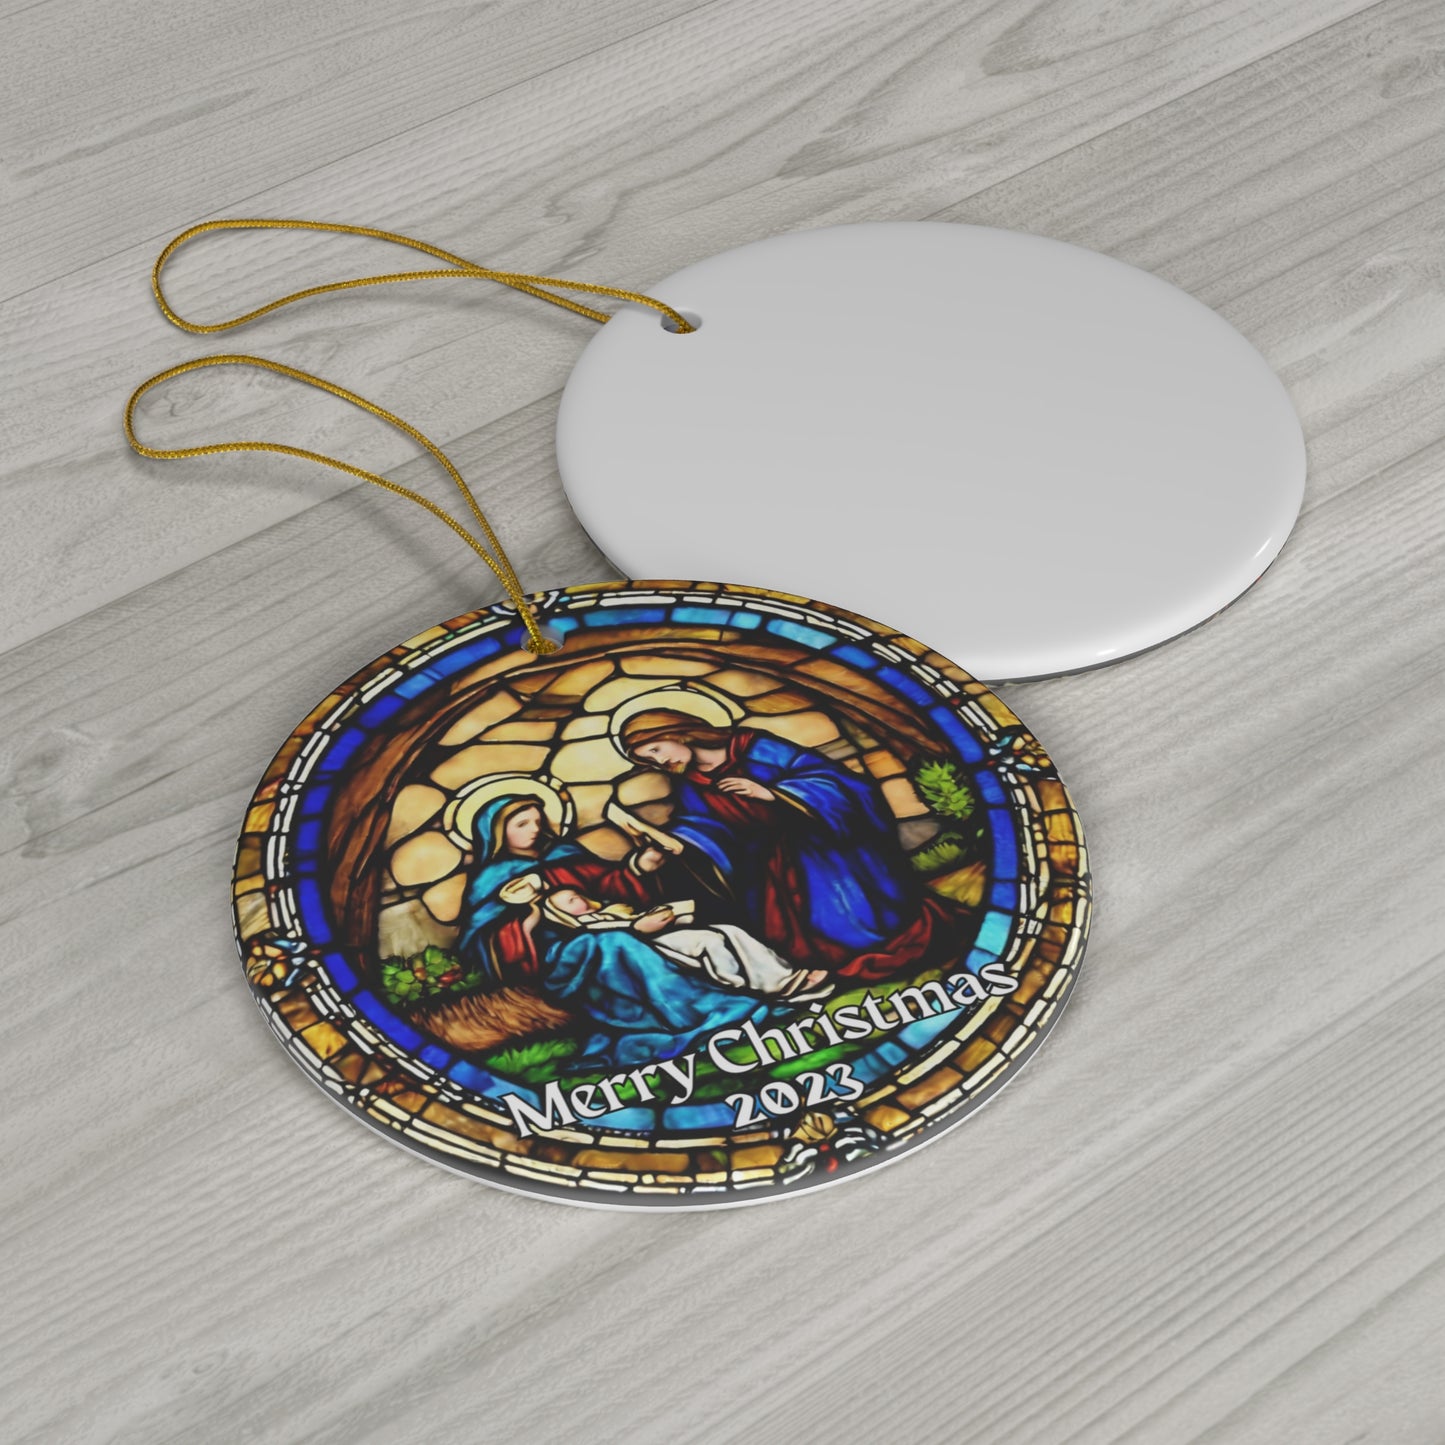 Nativity Christmas Ornament in Stain Glass, Mary, Joseph, Tree trimming, Holiday gift, Religious ornament, Meaningful Christmas gift